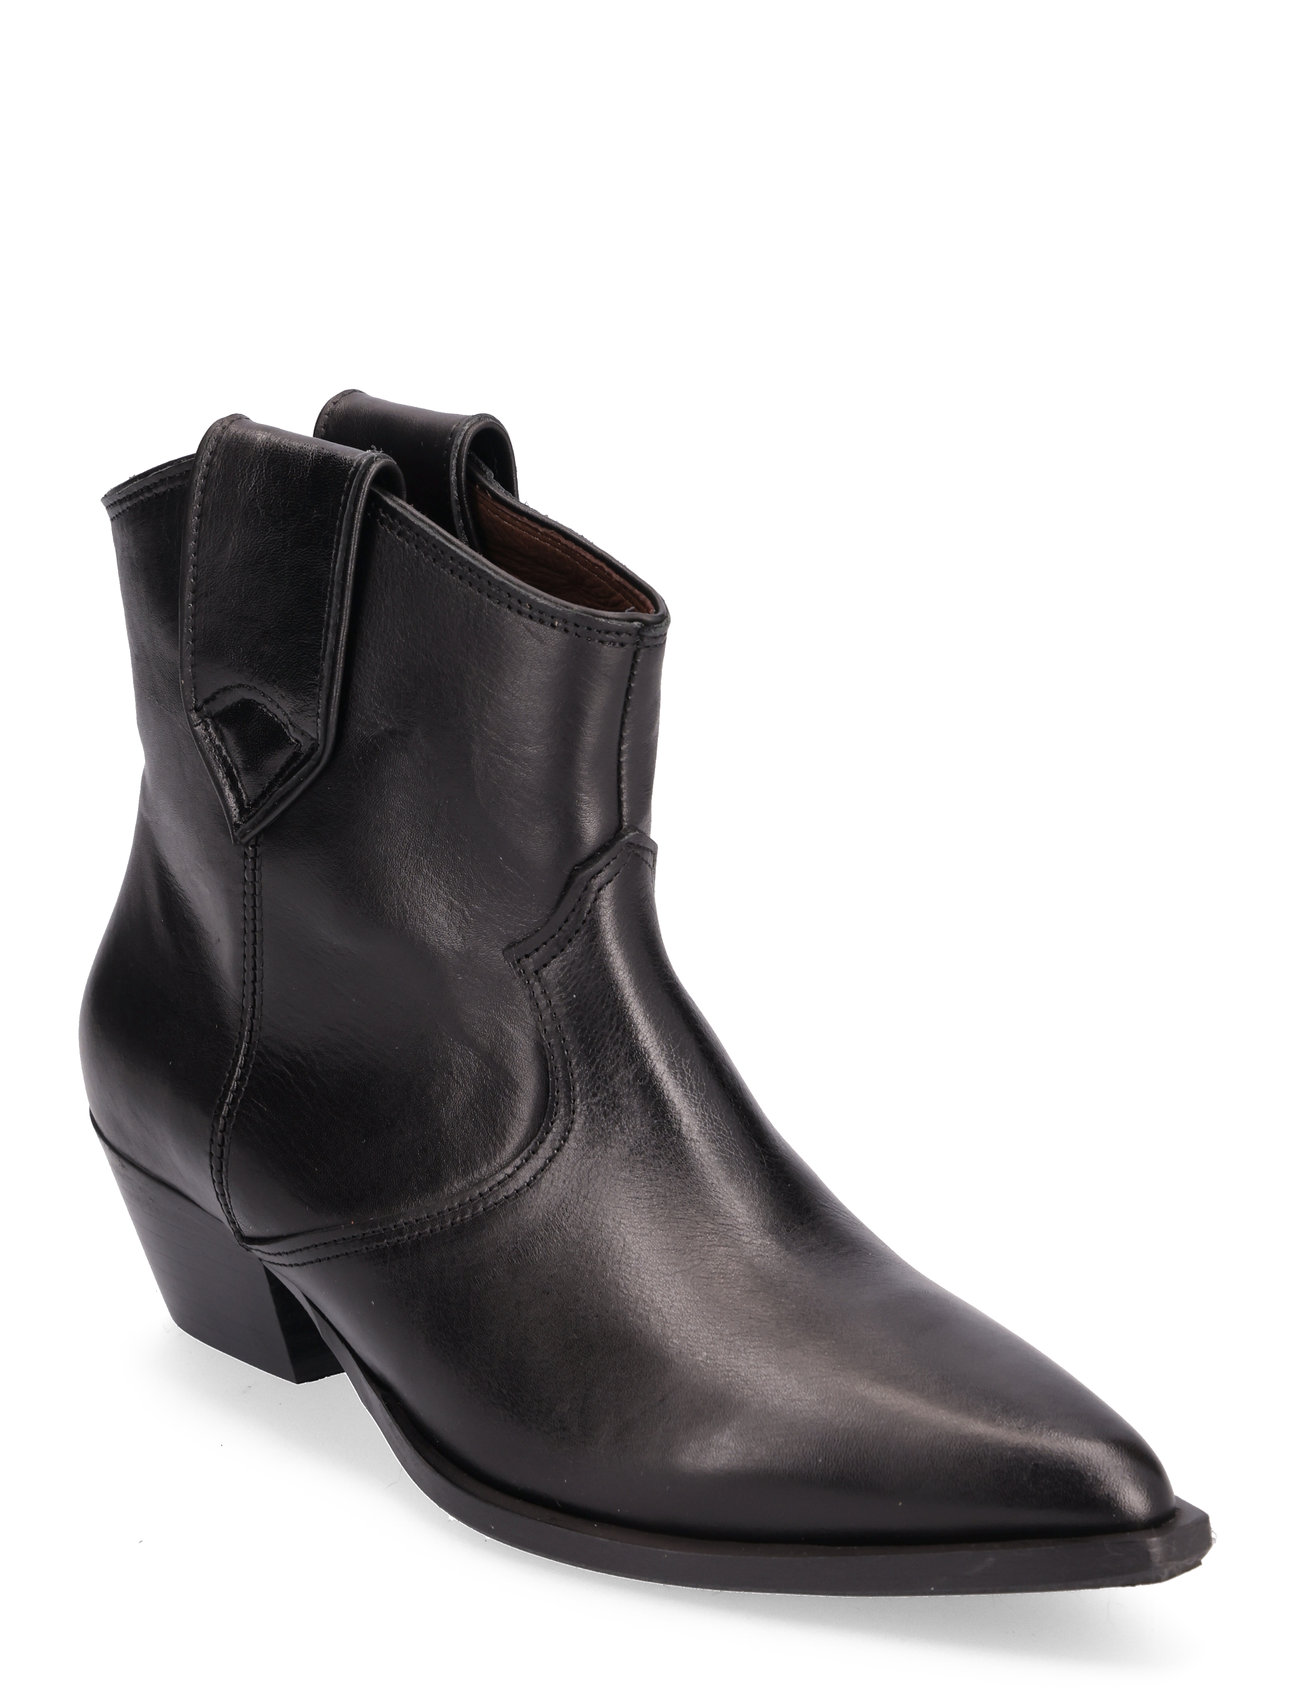 "Anonymous Copenhagen" "Joanni 35 Shoes Boots Ankle With Heel Black Anonymous